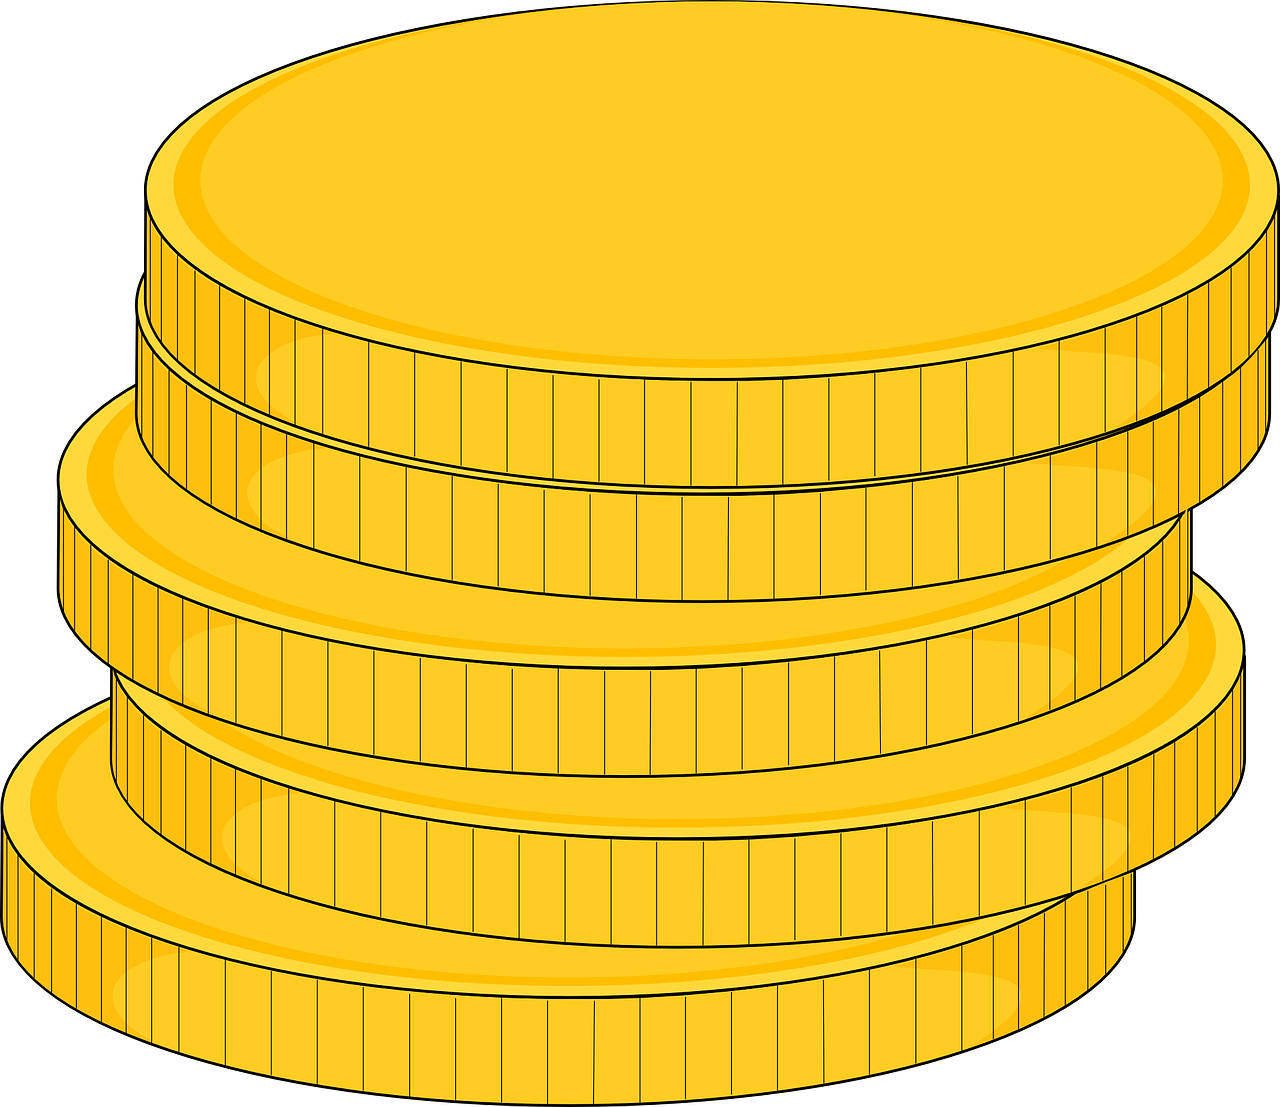 coins, gold, stacked-29516.jpg